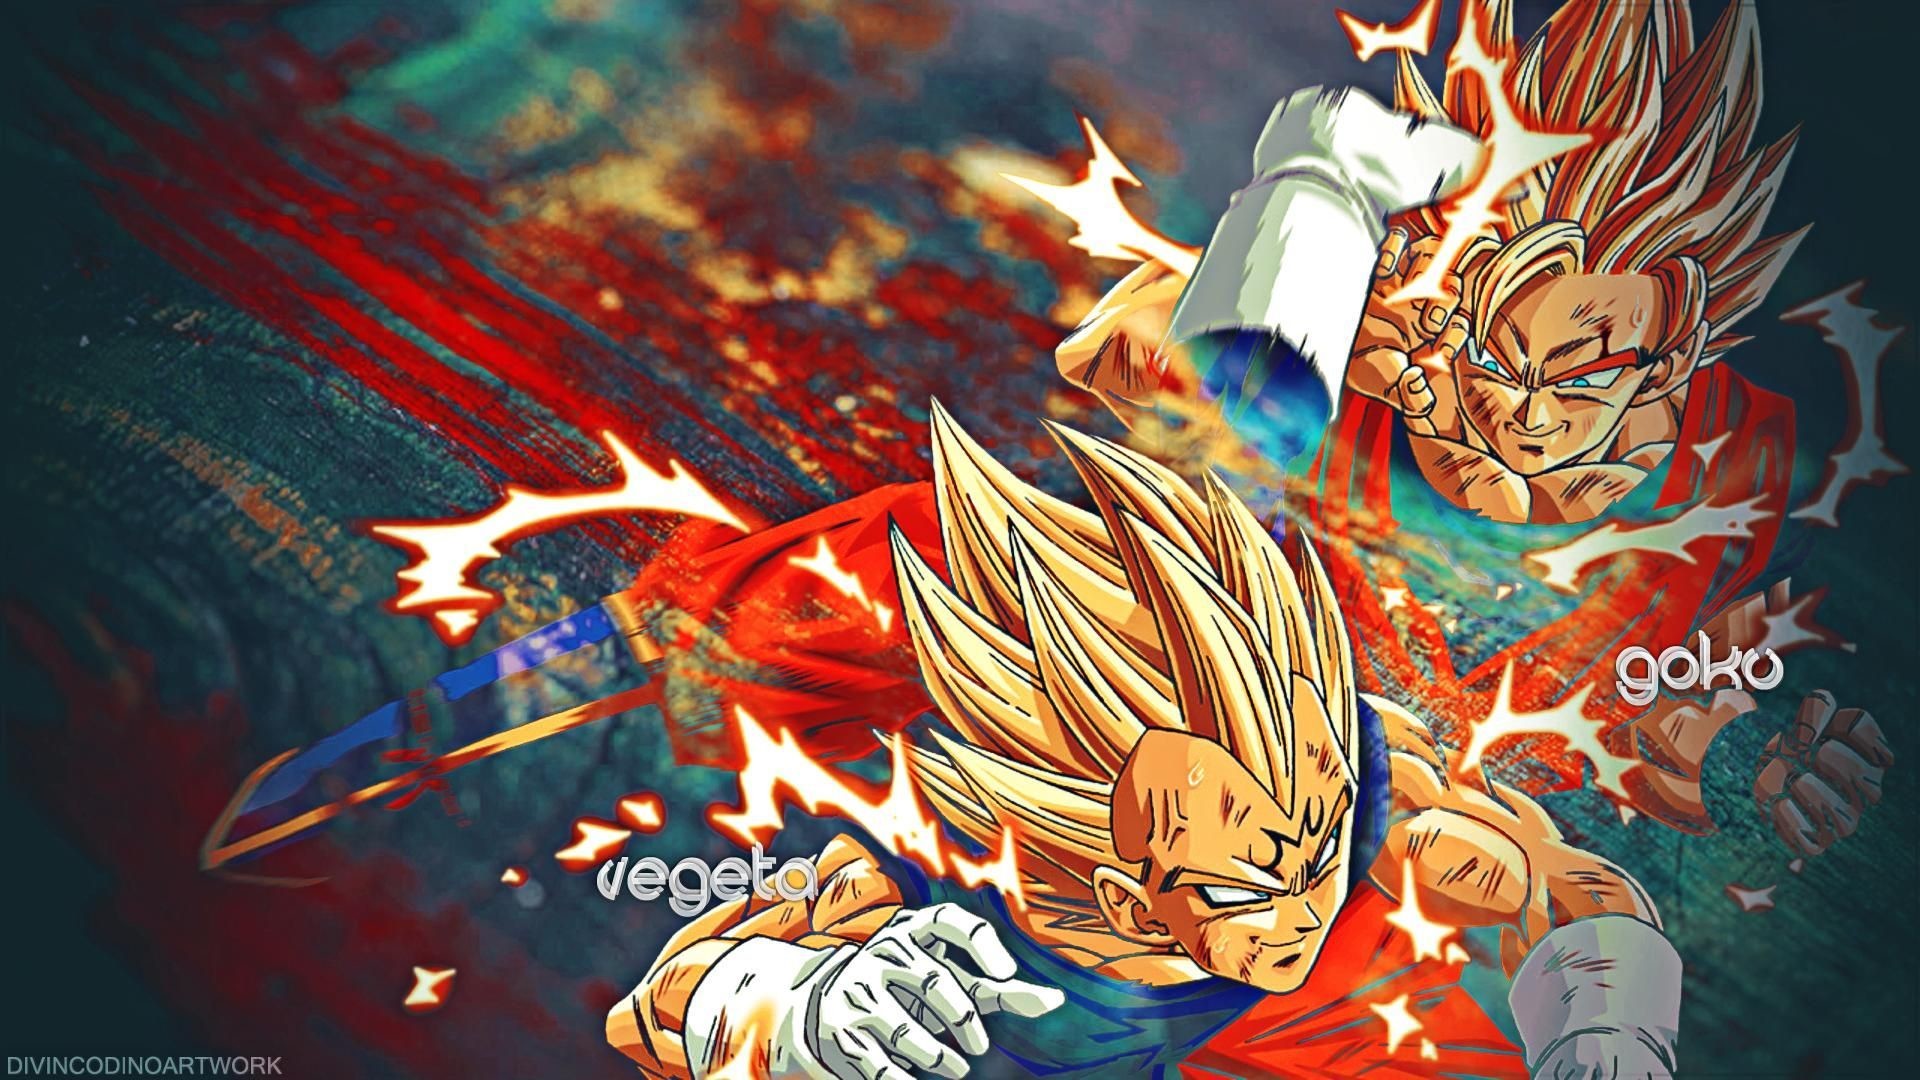 1920x1080 Dragon Ball Z HD Images, Dragon Ball Z HD Wallpapers - Stacy Kitterman for  PC